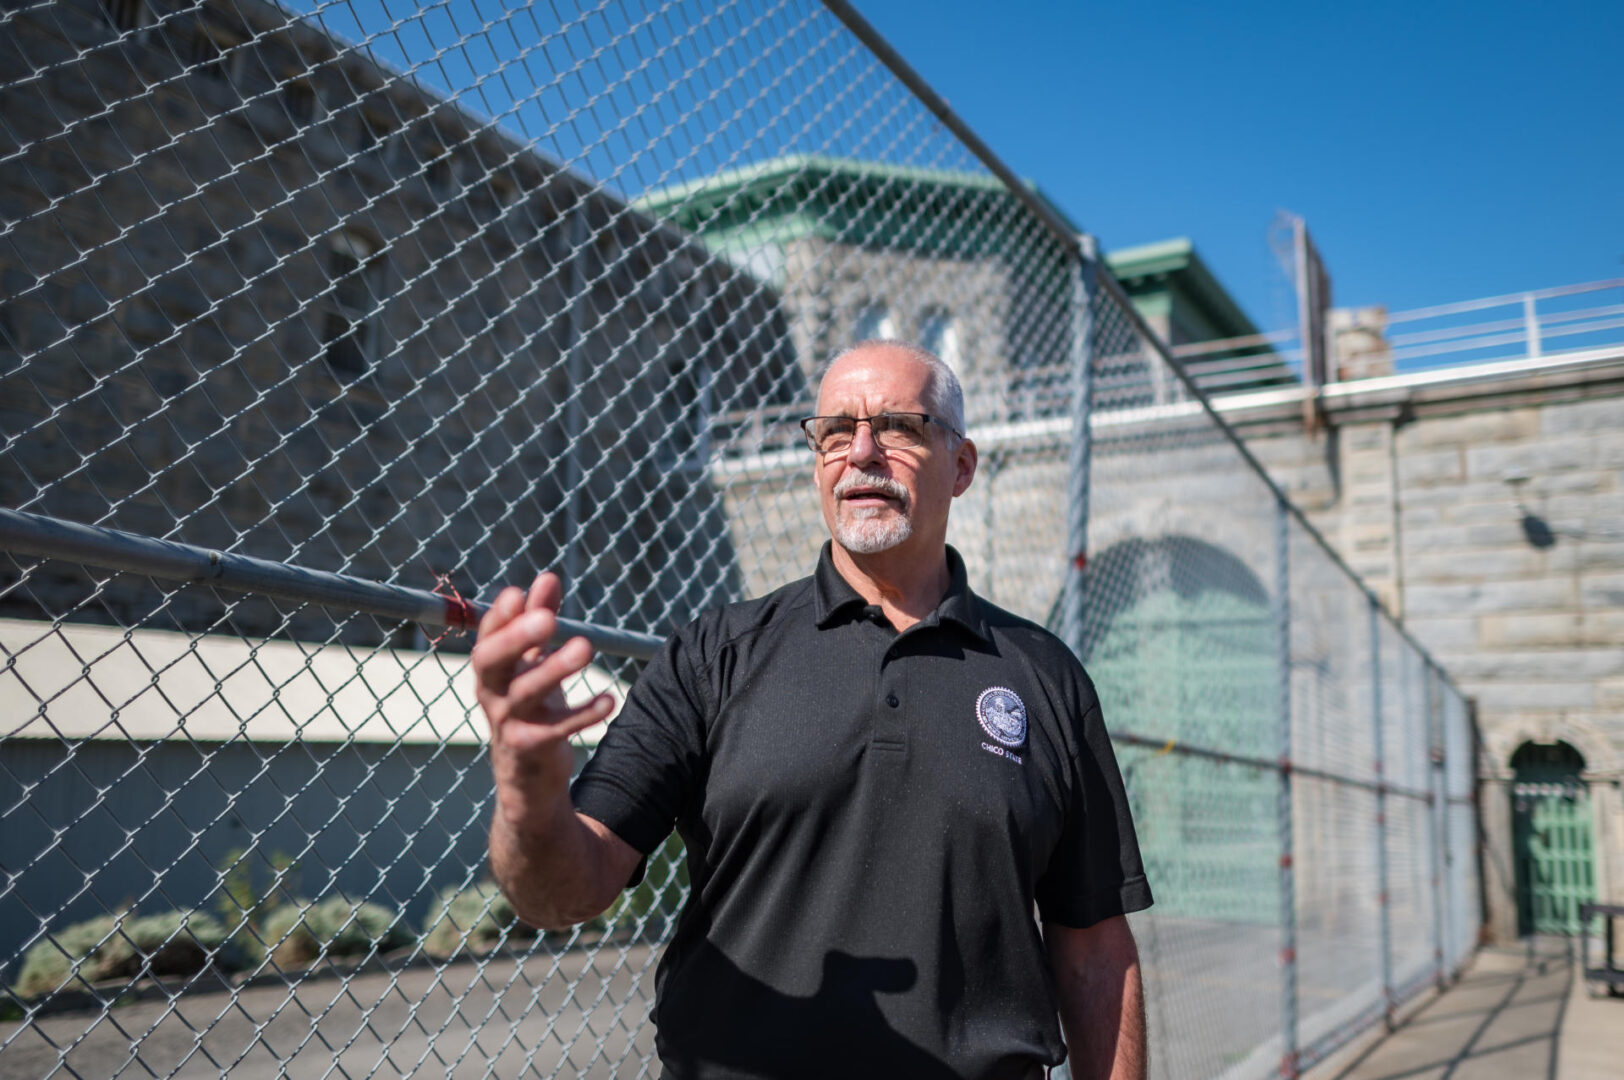 Rory Thelen, wearing a black polo shirt, is photographed during a tour of Folsom prison. He is standing outside with a chain-link fence in the background. 